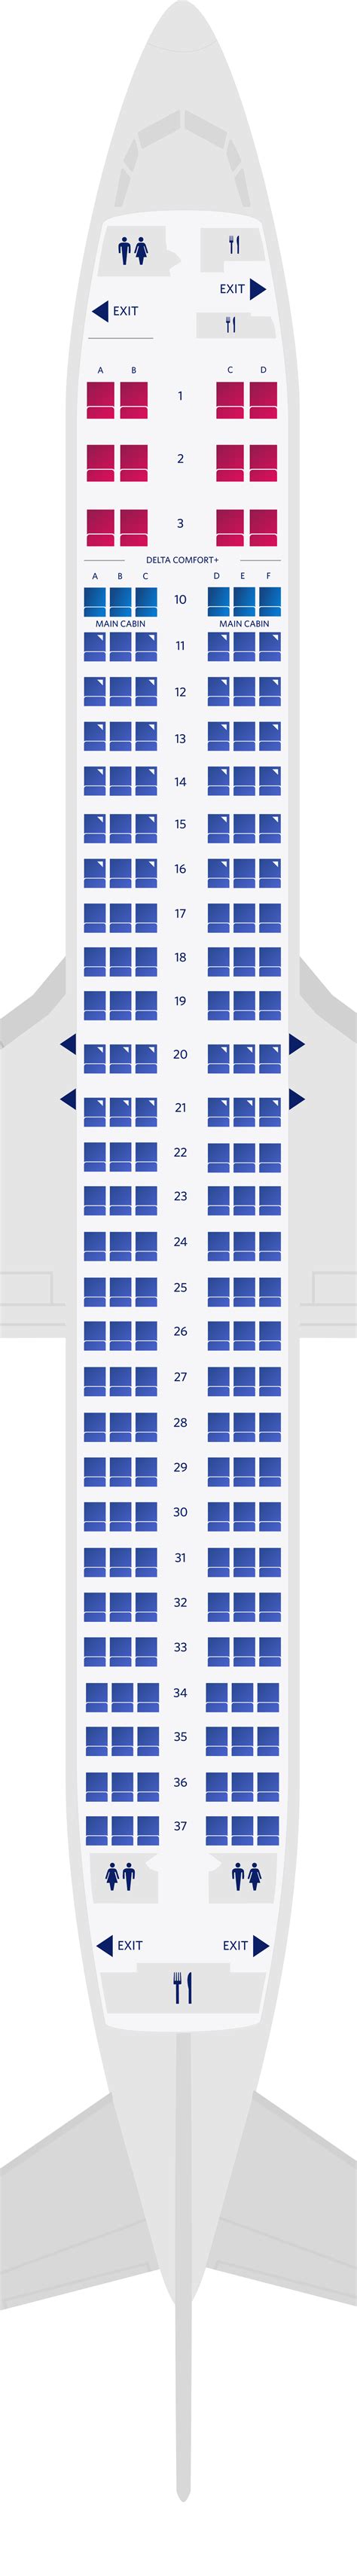 Boeing 737 900 United Seat Map: Overview. The Boeing United 737 900 plane has three cabins — First, Economy Plus, and Economy class. The United 737 900 seating chart shows that the plane offers everything to make your flight a pleasant experience. All 737 United Airlines are equipped with WiFi for flights within the country. .